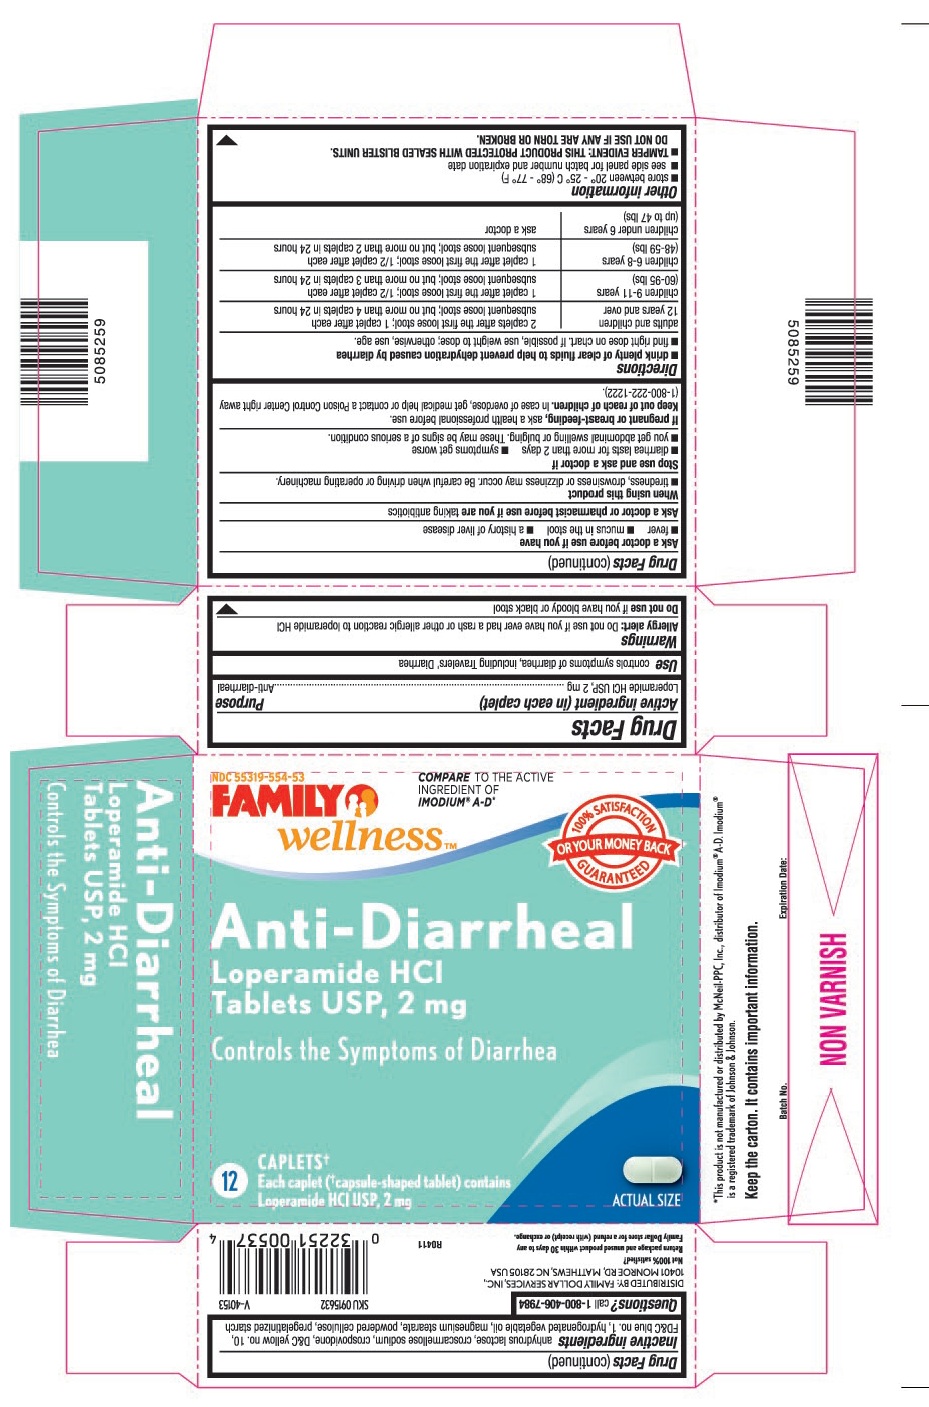 This is the 12 count blister carton label for Family Dollar Loperamide HCl tablets USP, 2 mg.